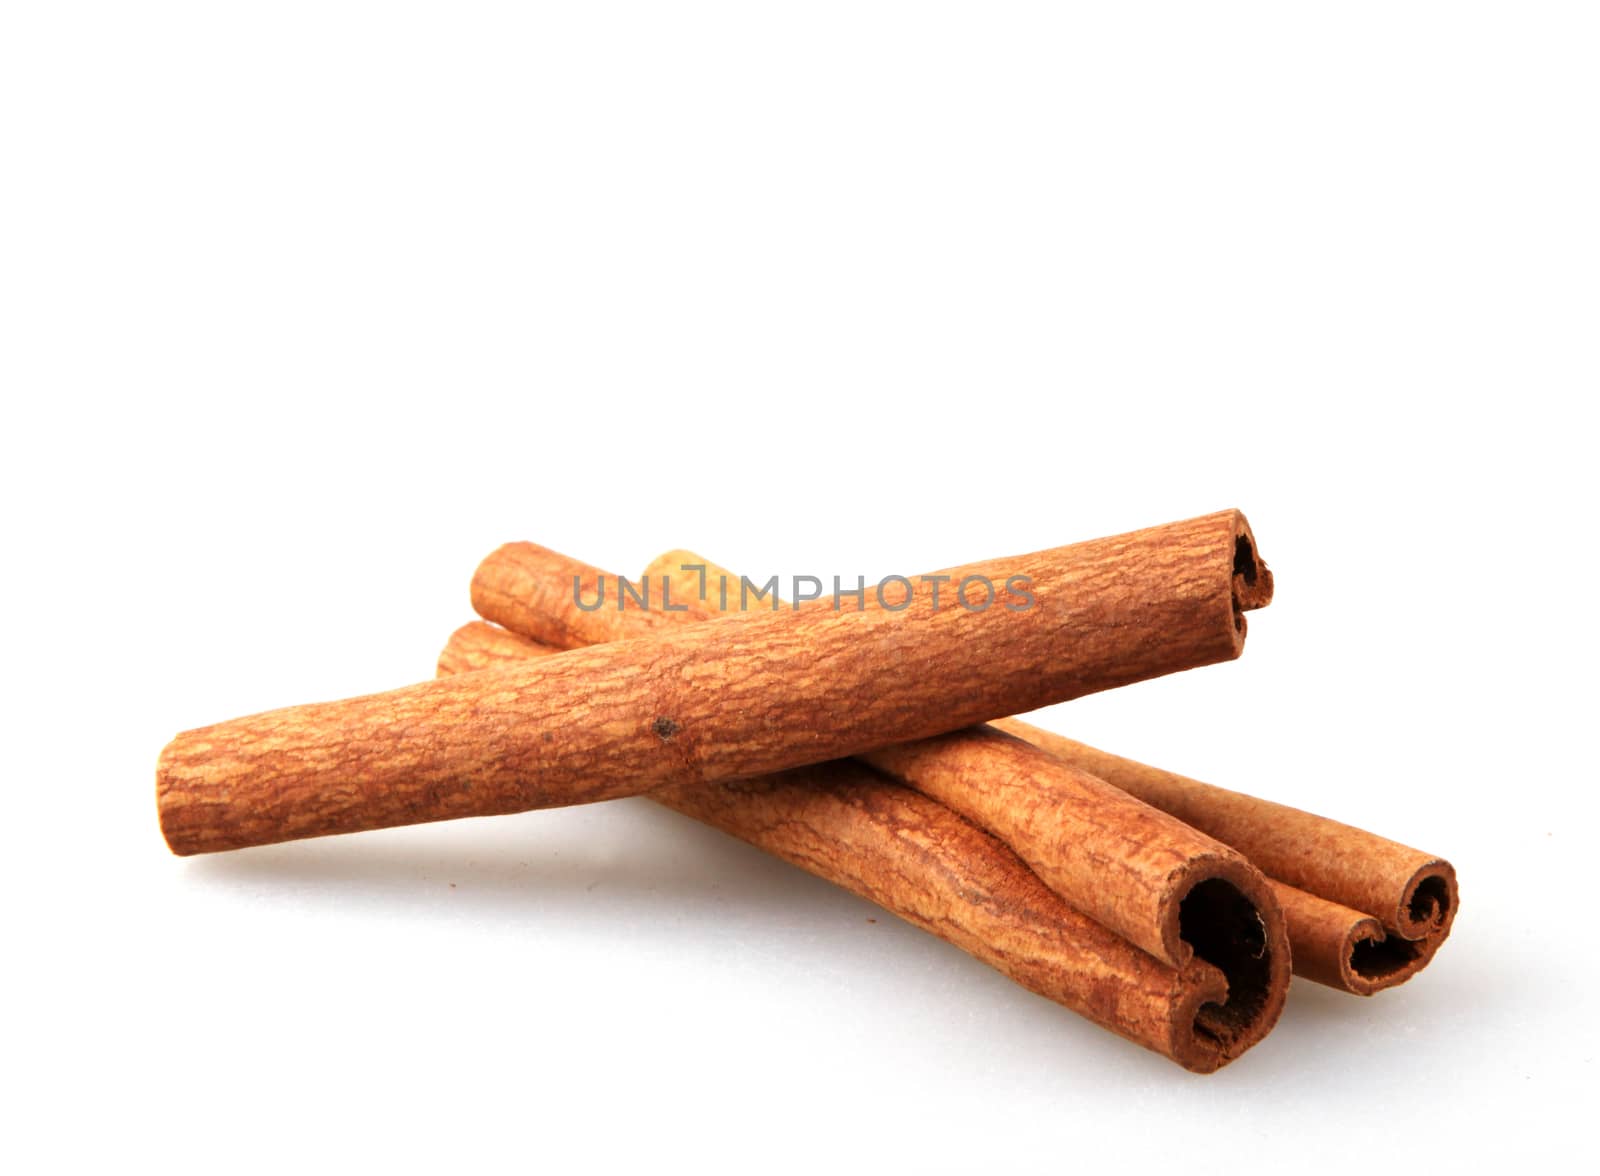 Cinnamon Sticks Isolated On White Background by nenovbrothers